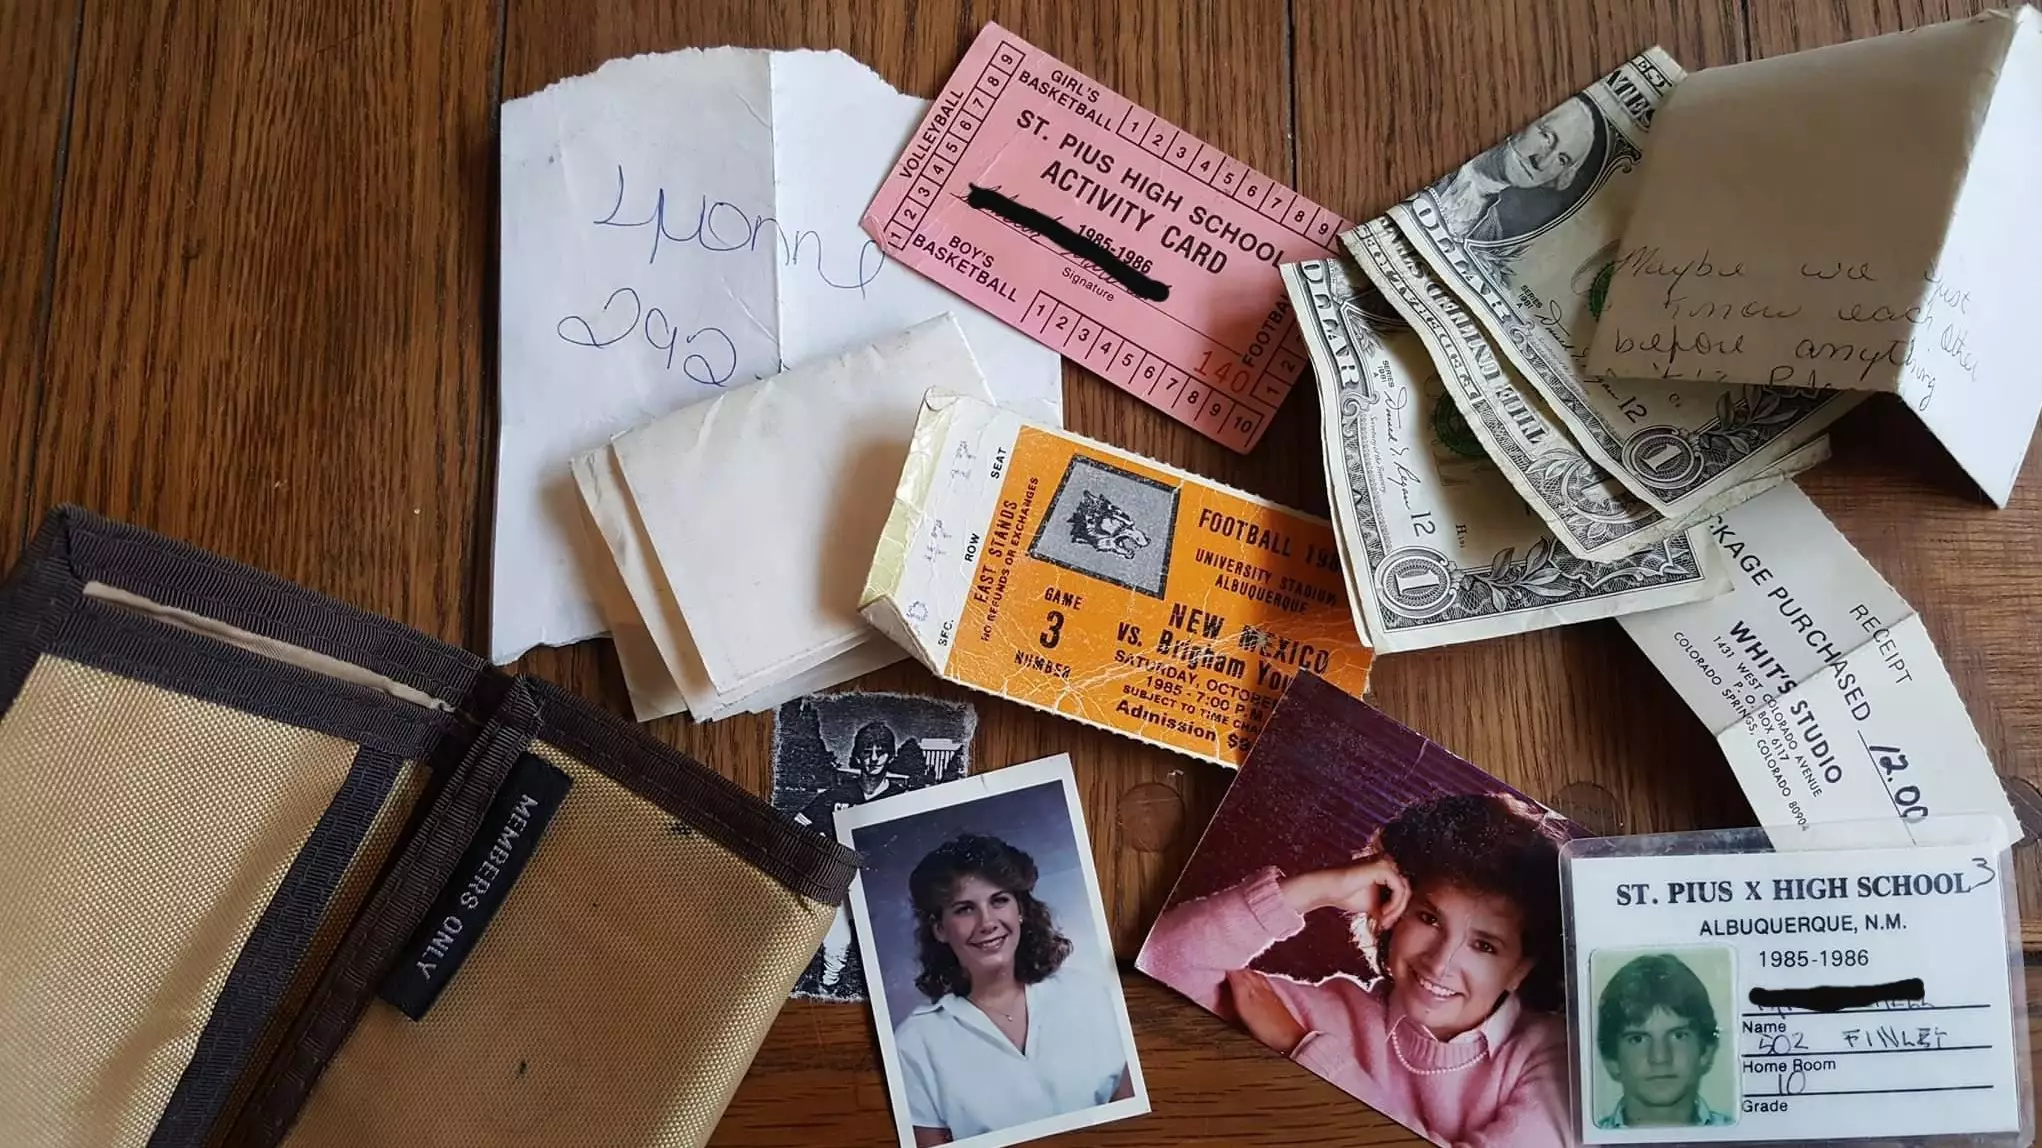 Man Finds His Wallet From 1985 And The Contents Show A Look Into His Life Back Then